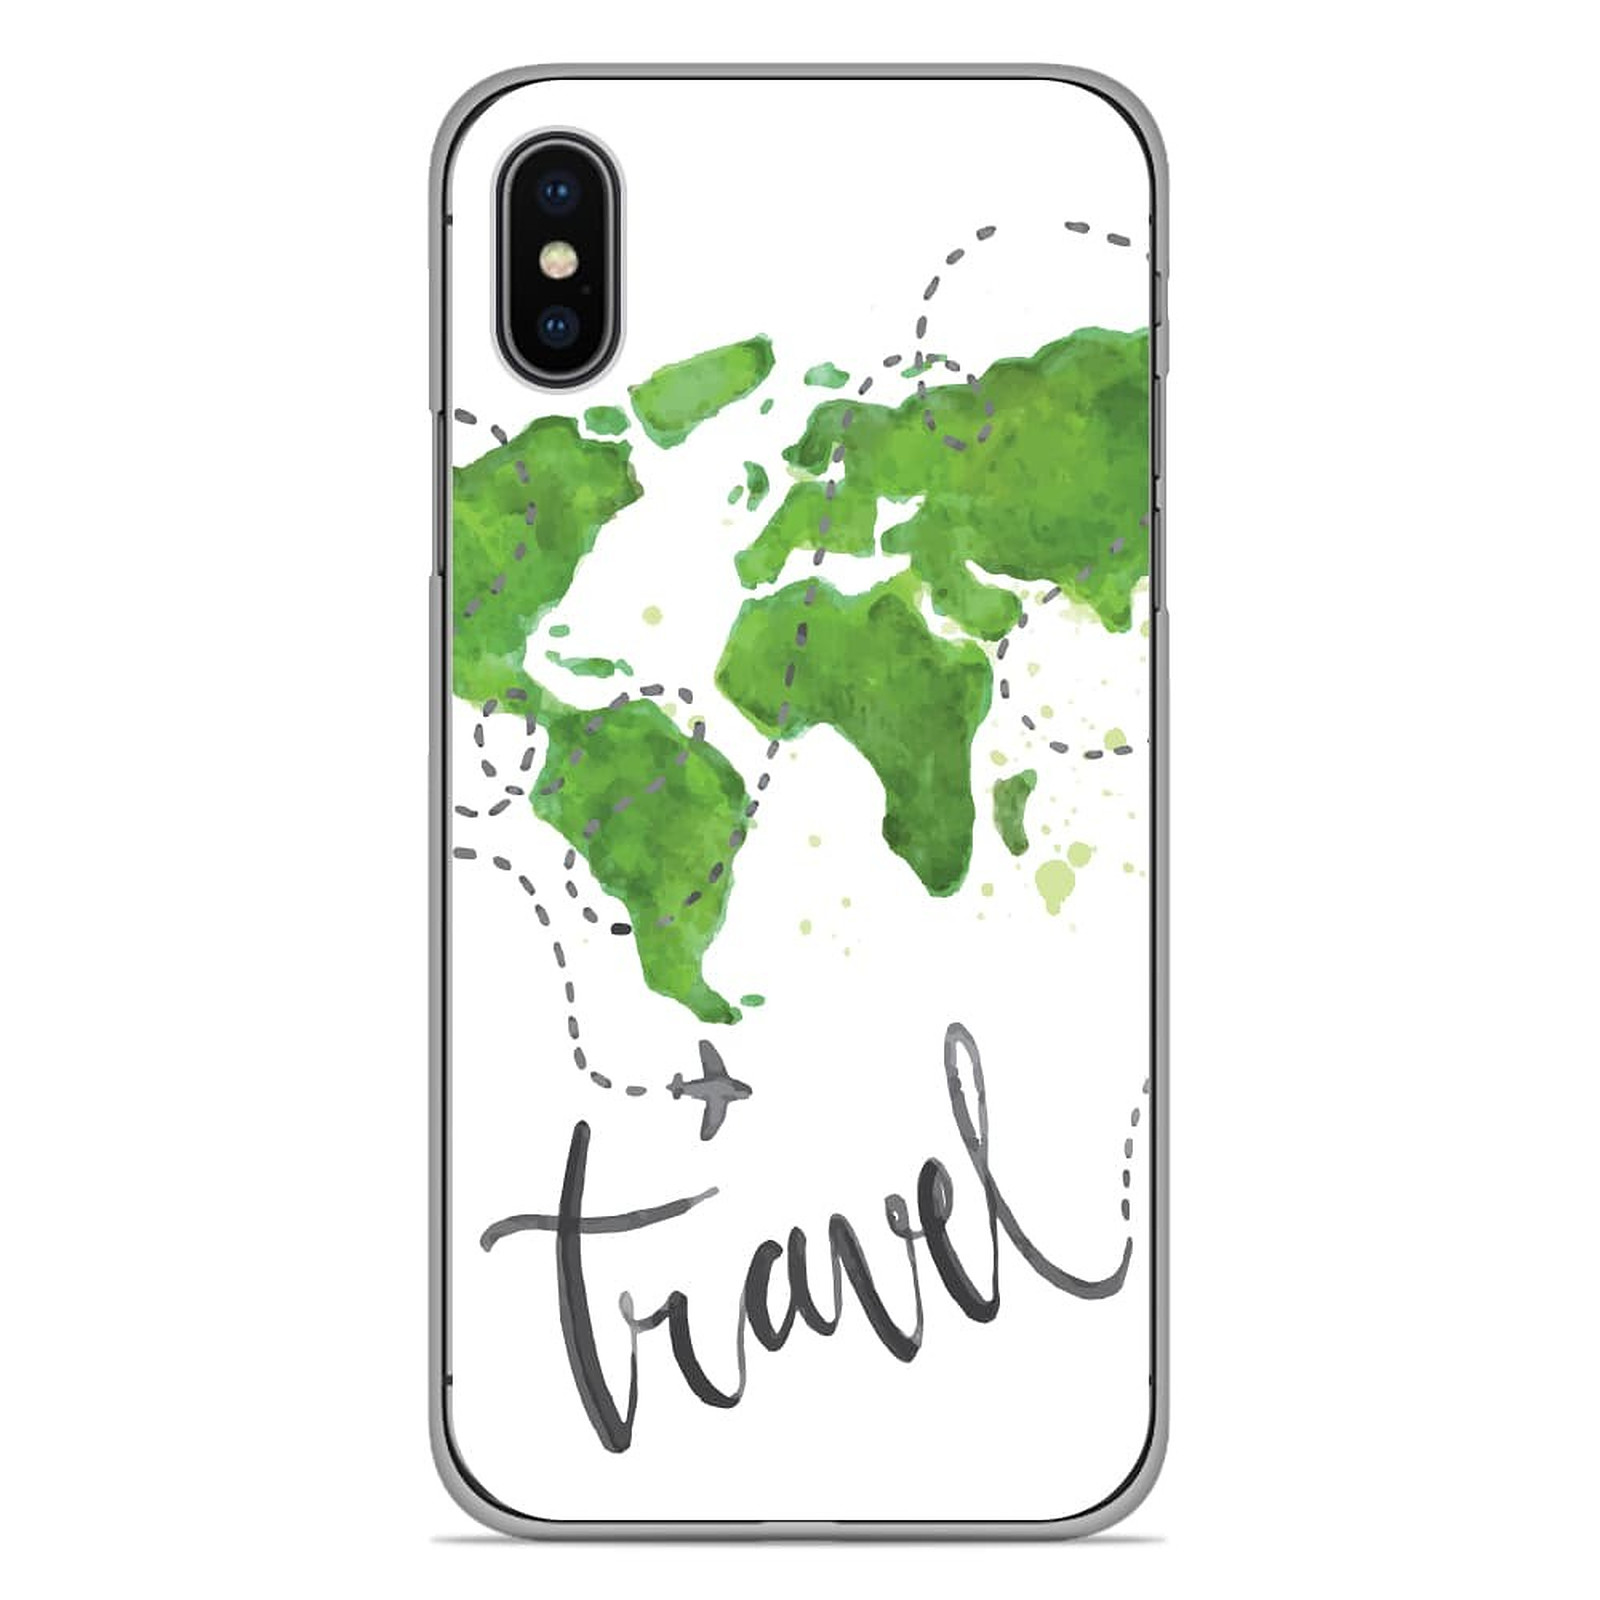 1001 Coques Coque silicone gel Apple iPhone X / XS motif Map Travel - Coque telephone 1001Coques